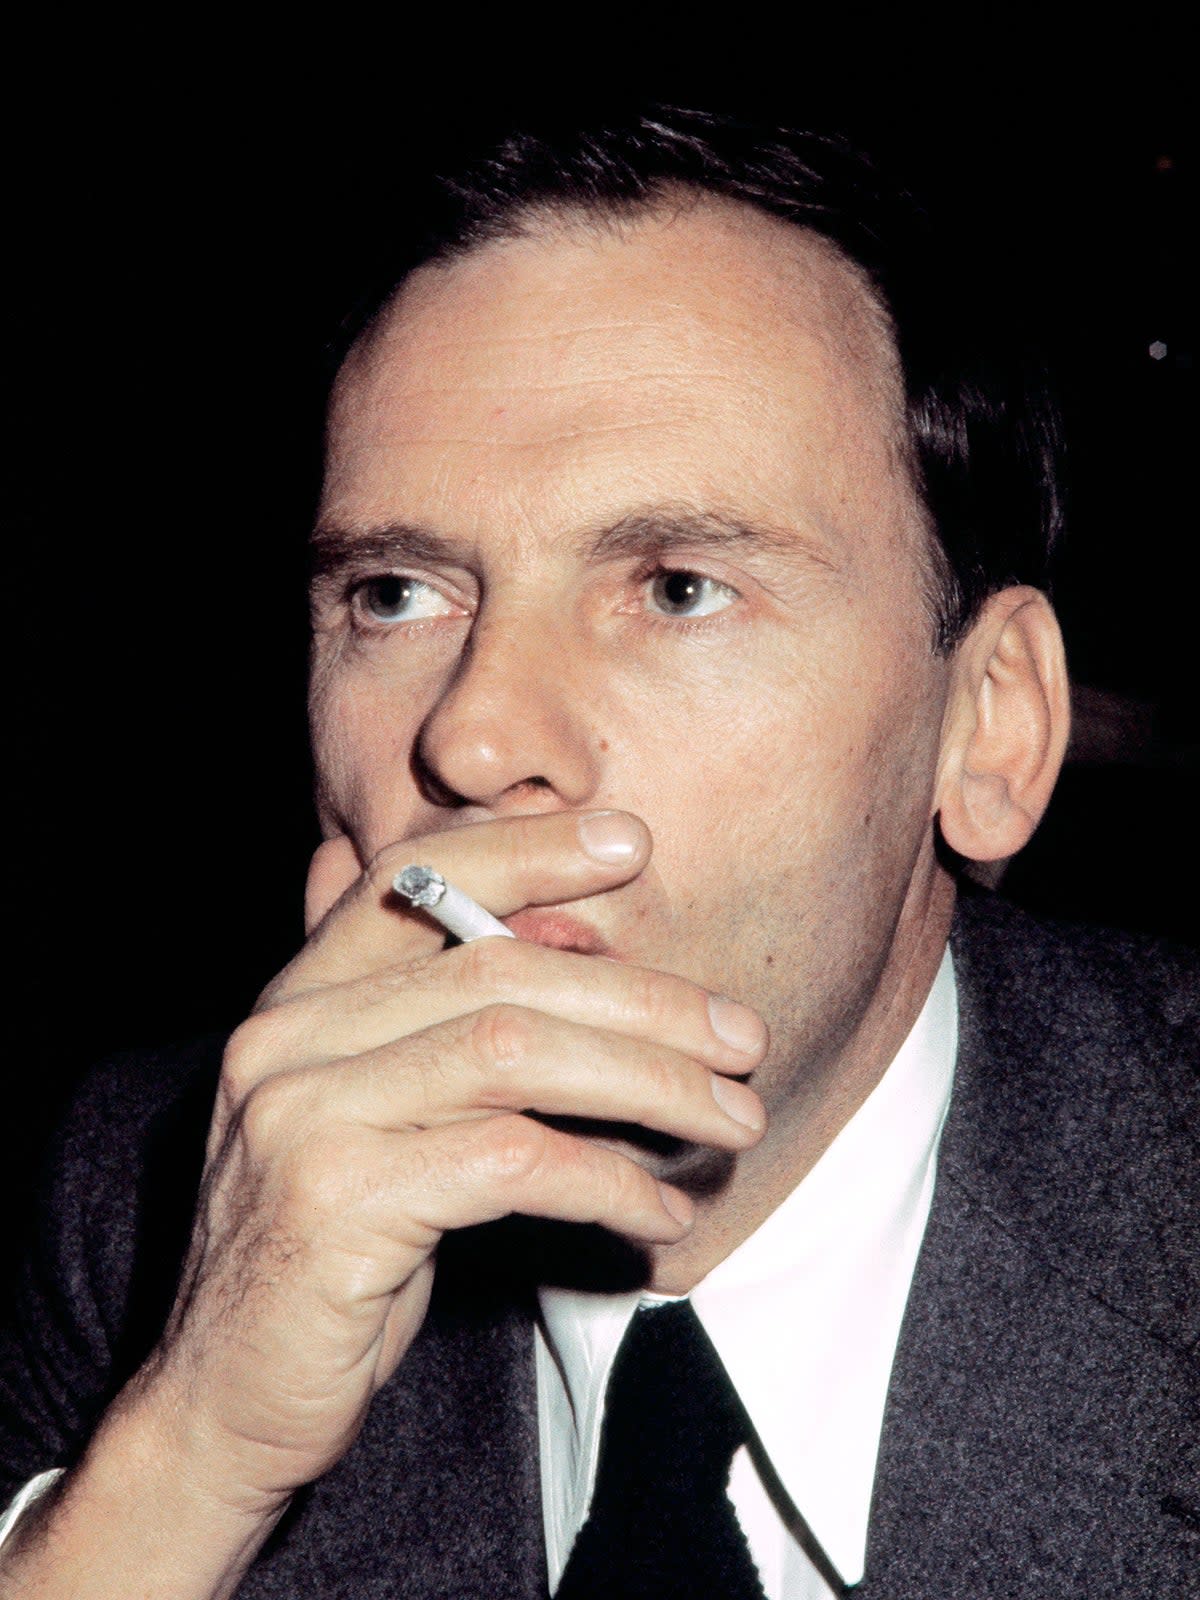 Reluctant star: Trintignant in 1975, shortly before retreating from the spotlight  (AFP/Getty)